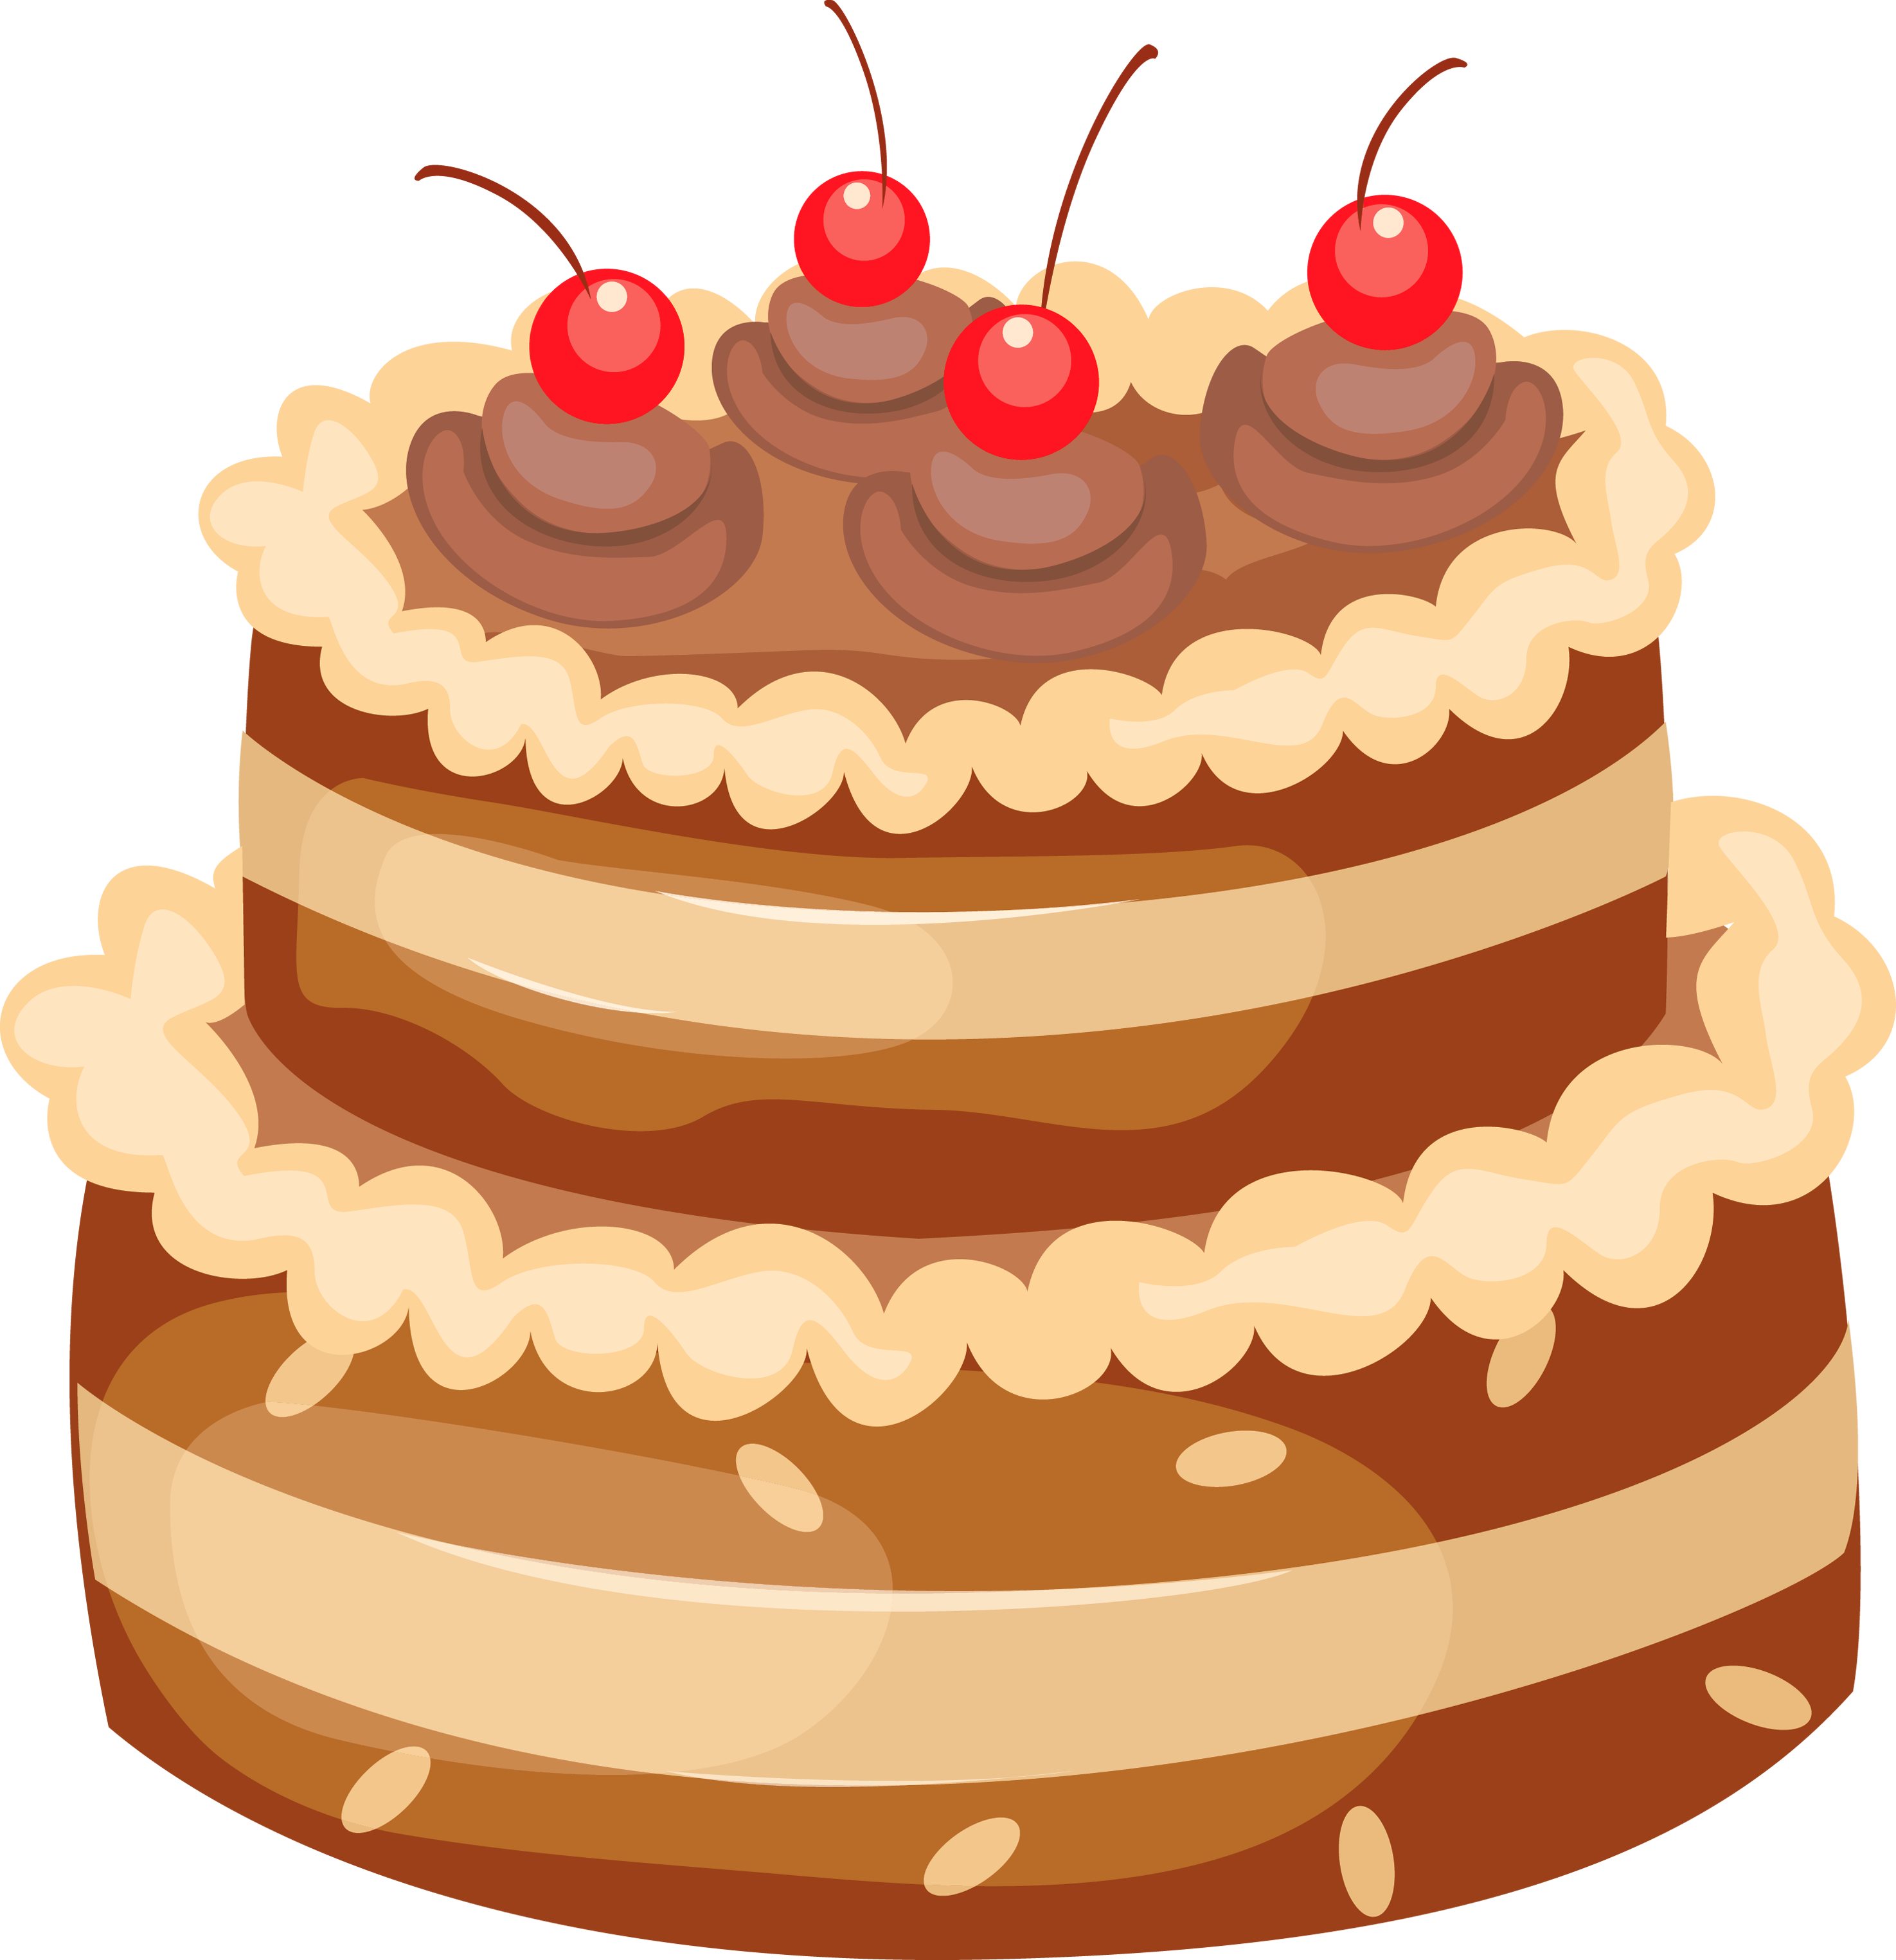 Chocolate Cake Clipart | Clipart Panda - Free Clipart Images